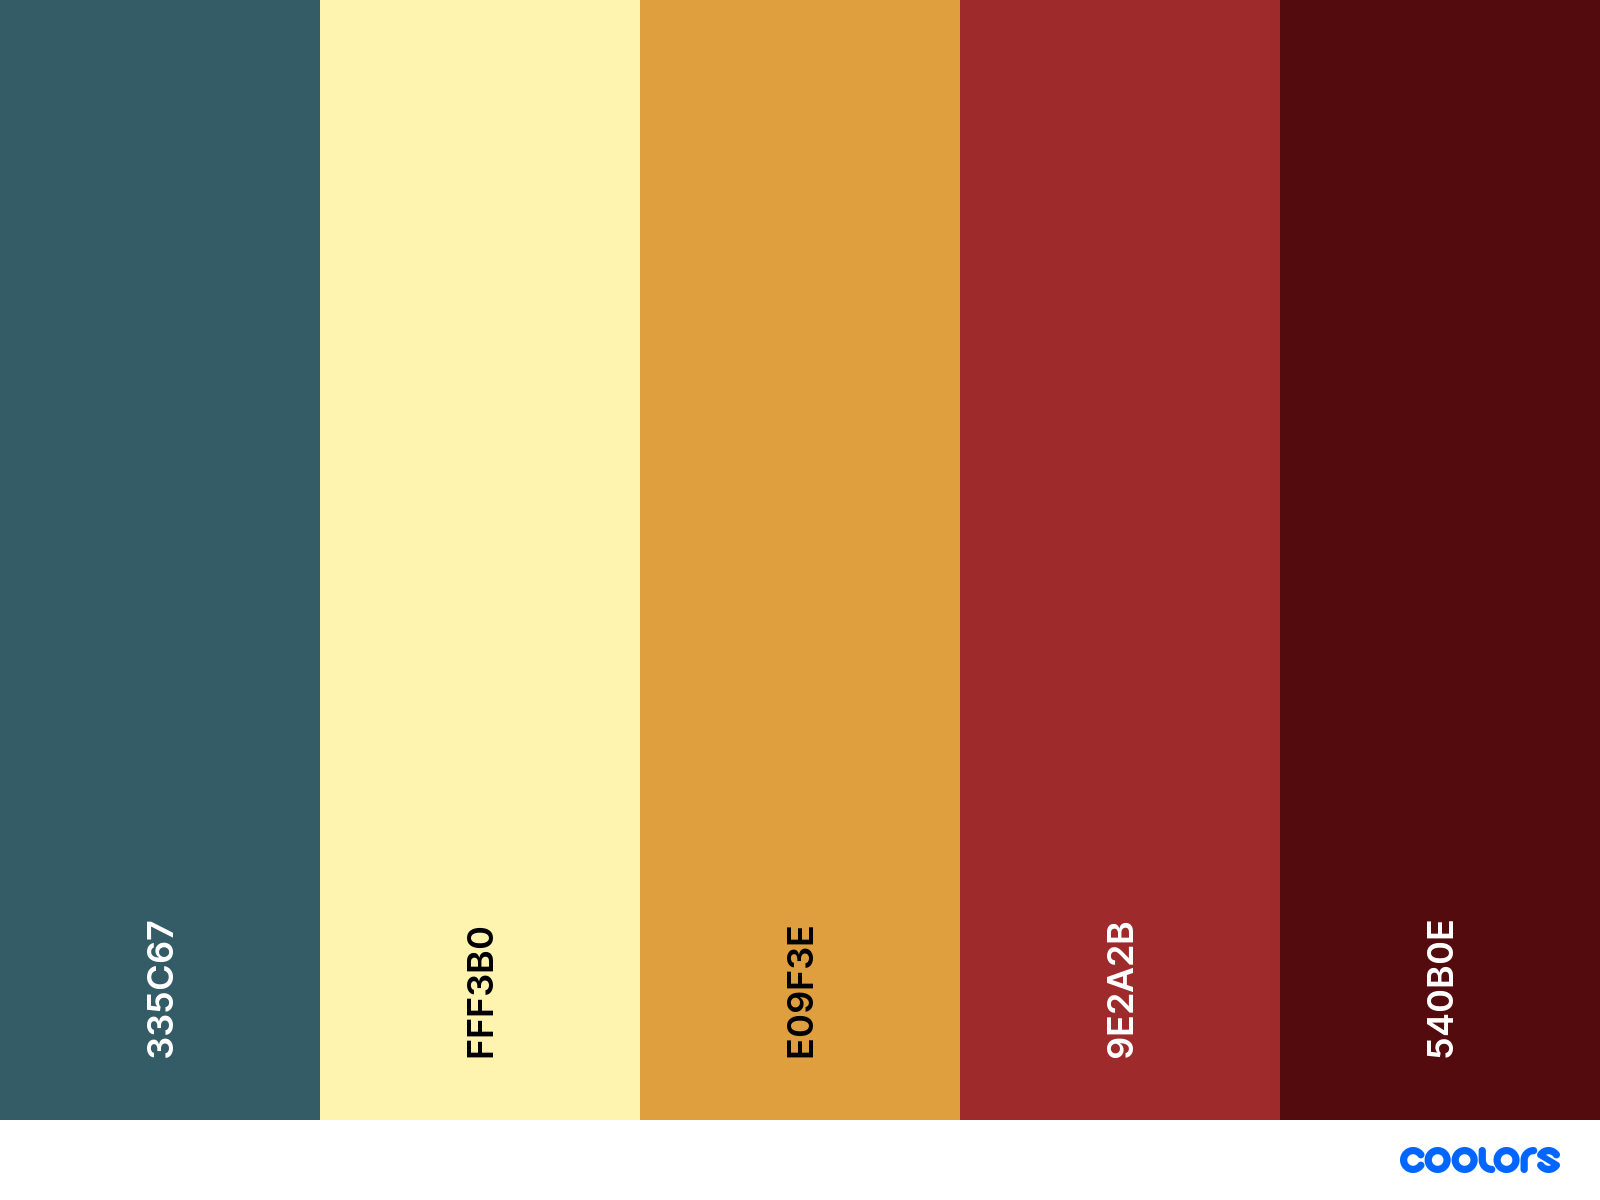 An example palette exported from Coolors